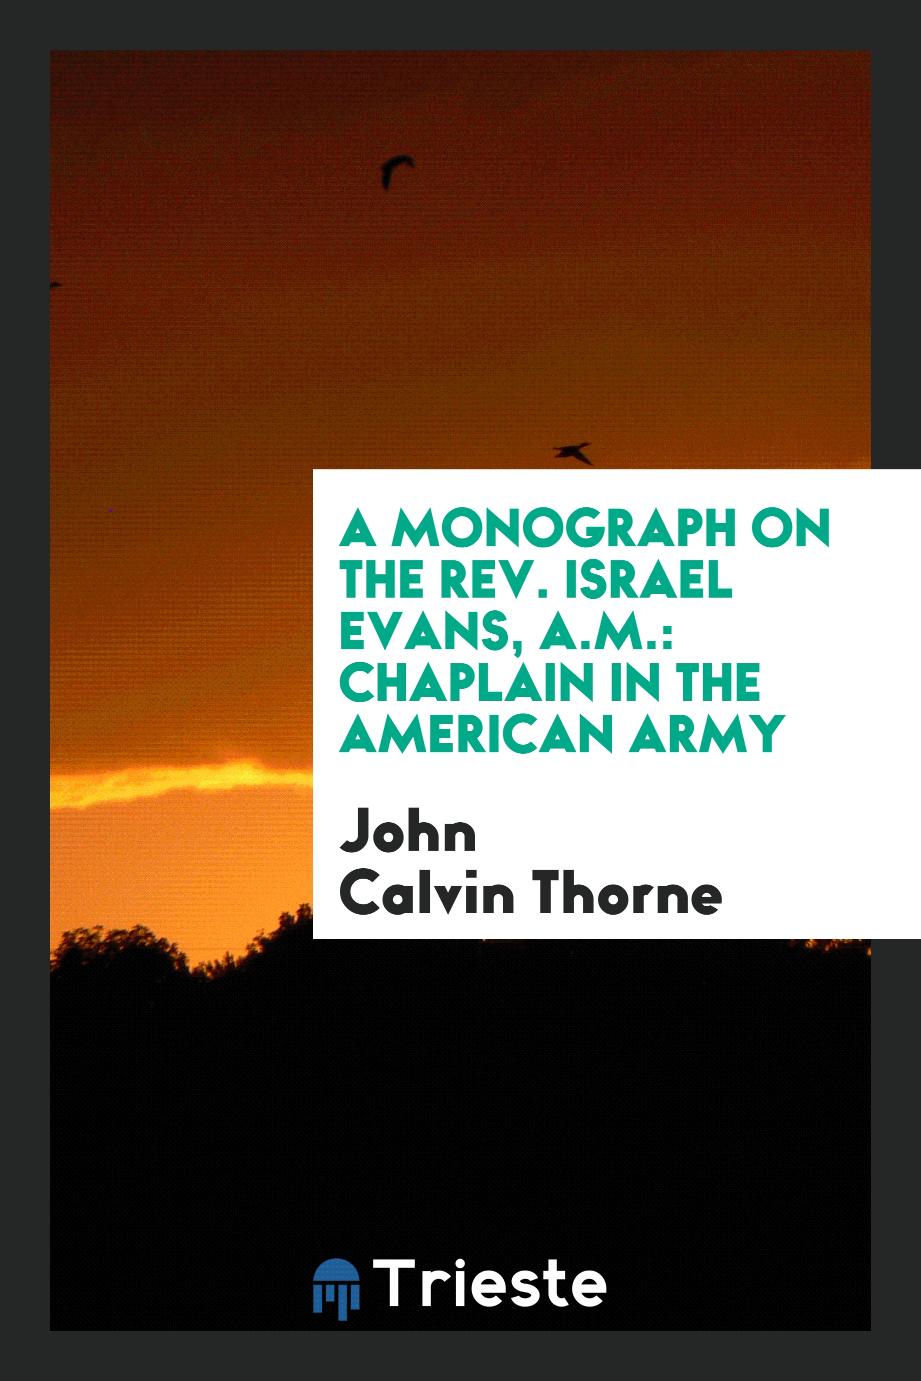 A Monograph on the Rev. Israel Evans, A.M.: Chaplain in the American Army